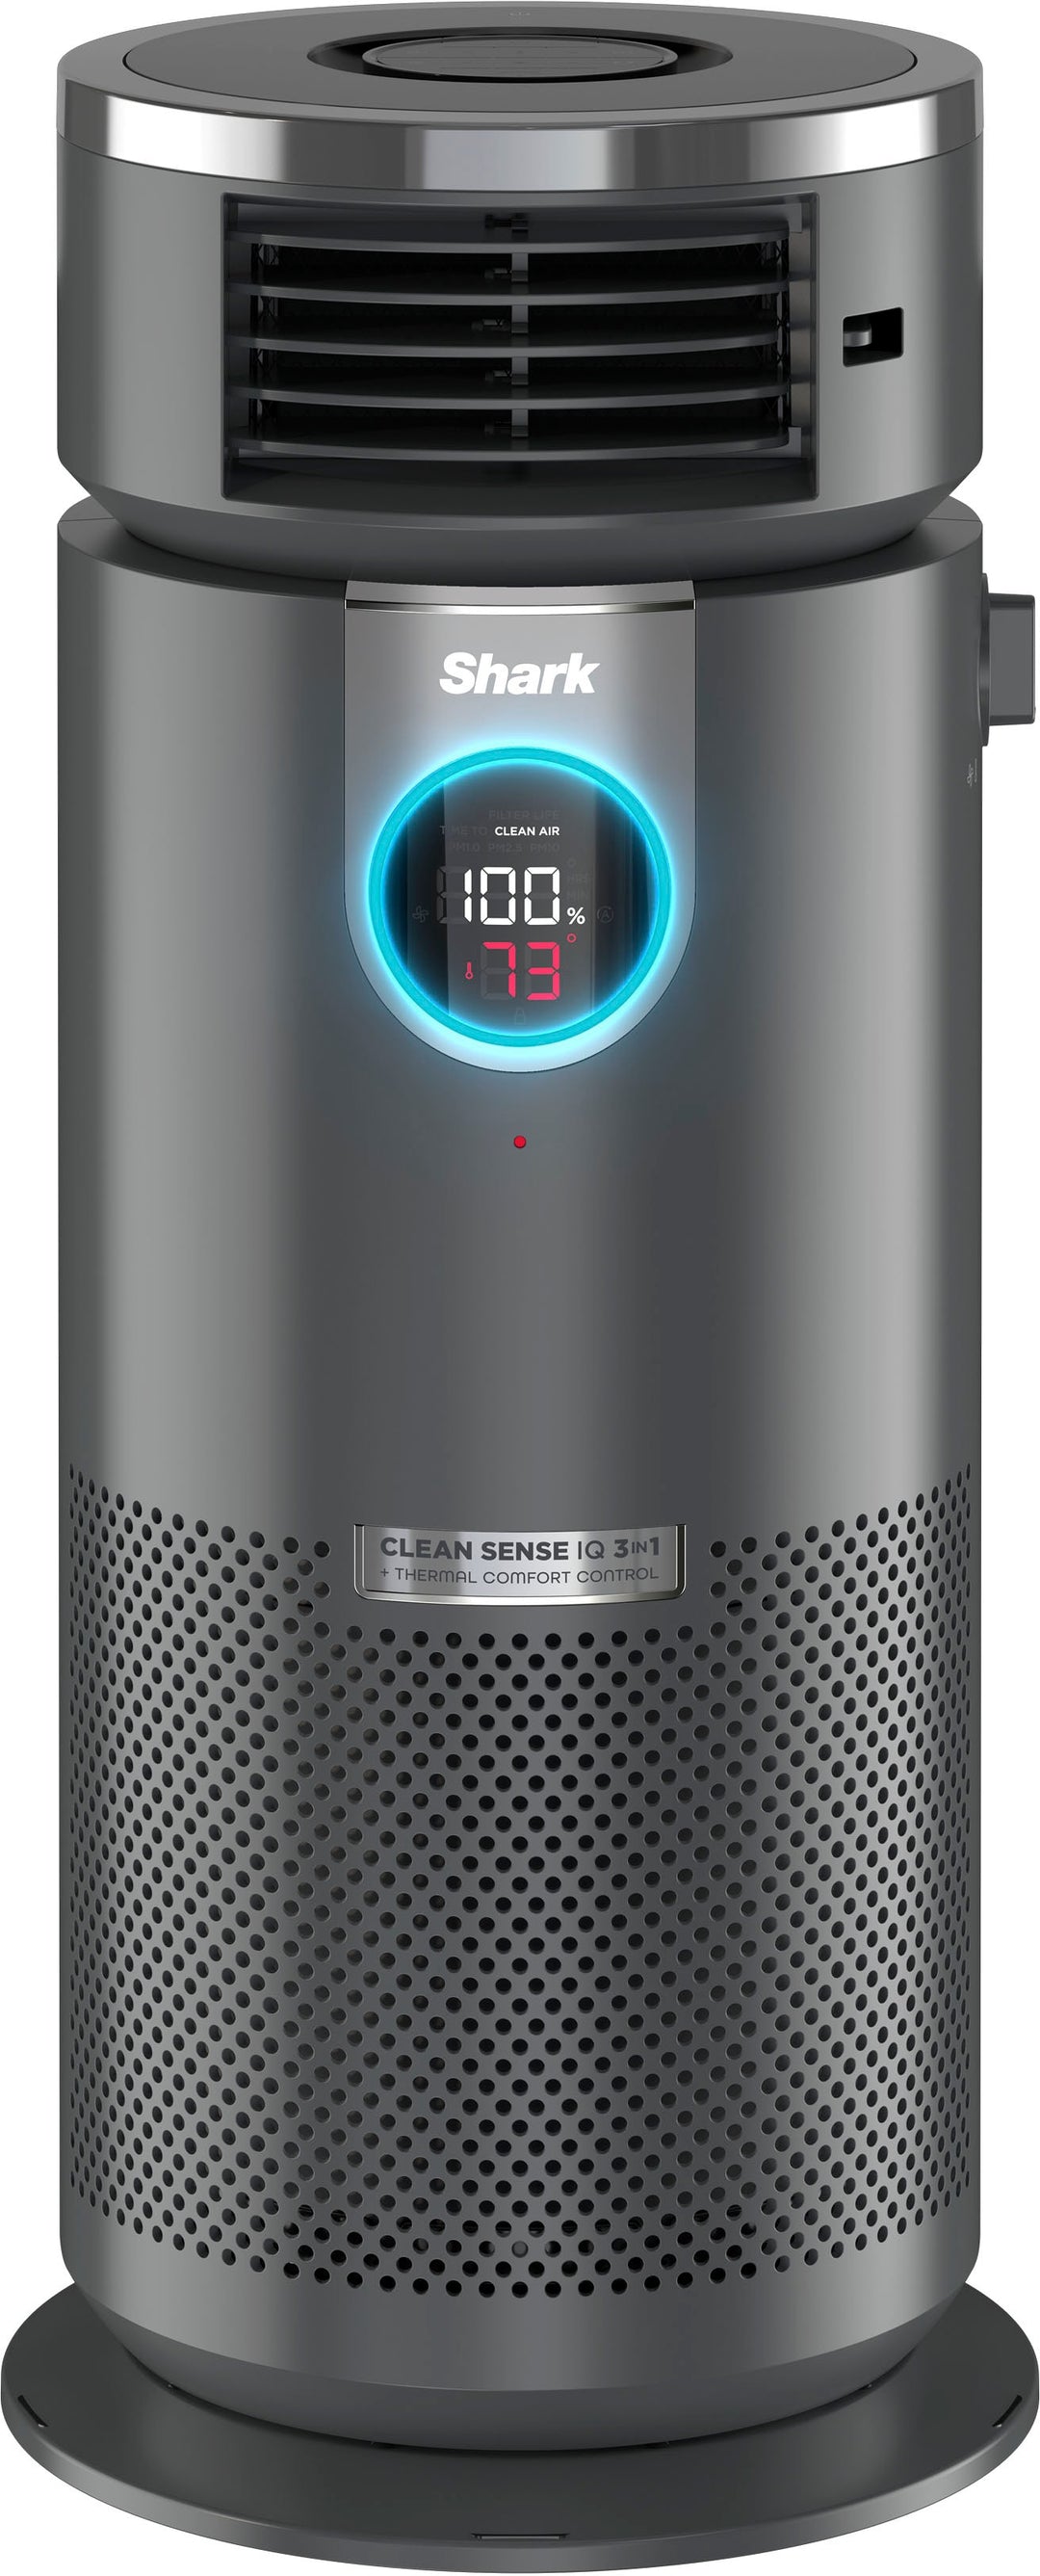 Shark Air Purifier 3-in-1 with True HEPA Filter, Air Purifier, Purified Heat, Purifed Fan, Odor Lock, 500 sq. ft. - Black_0